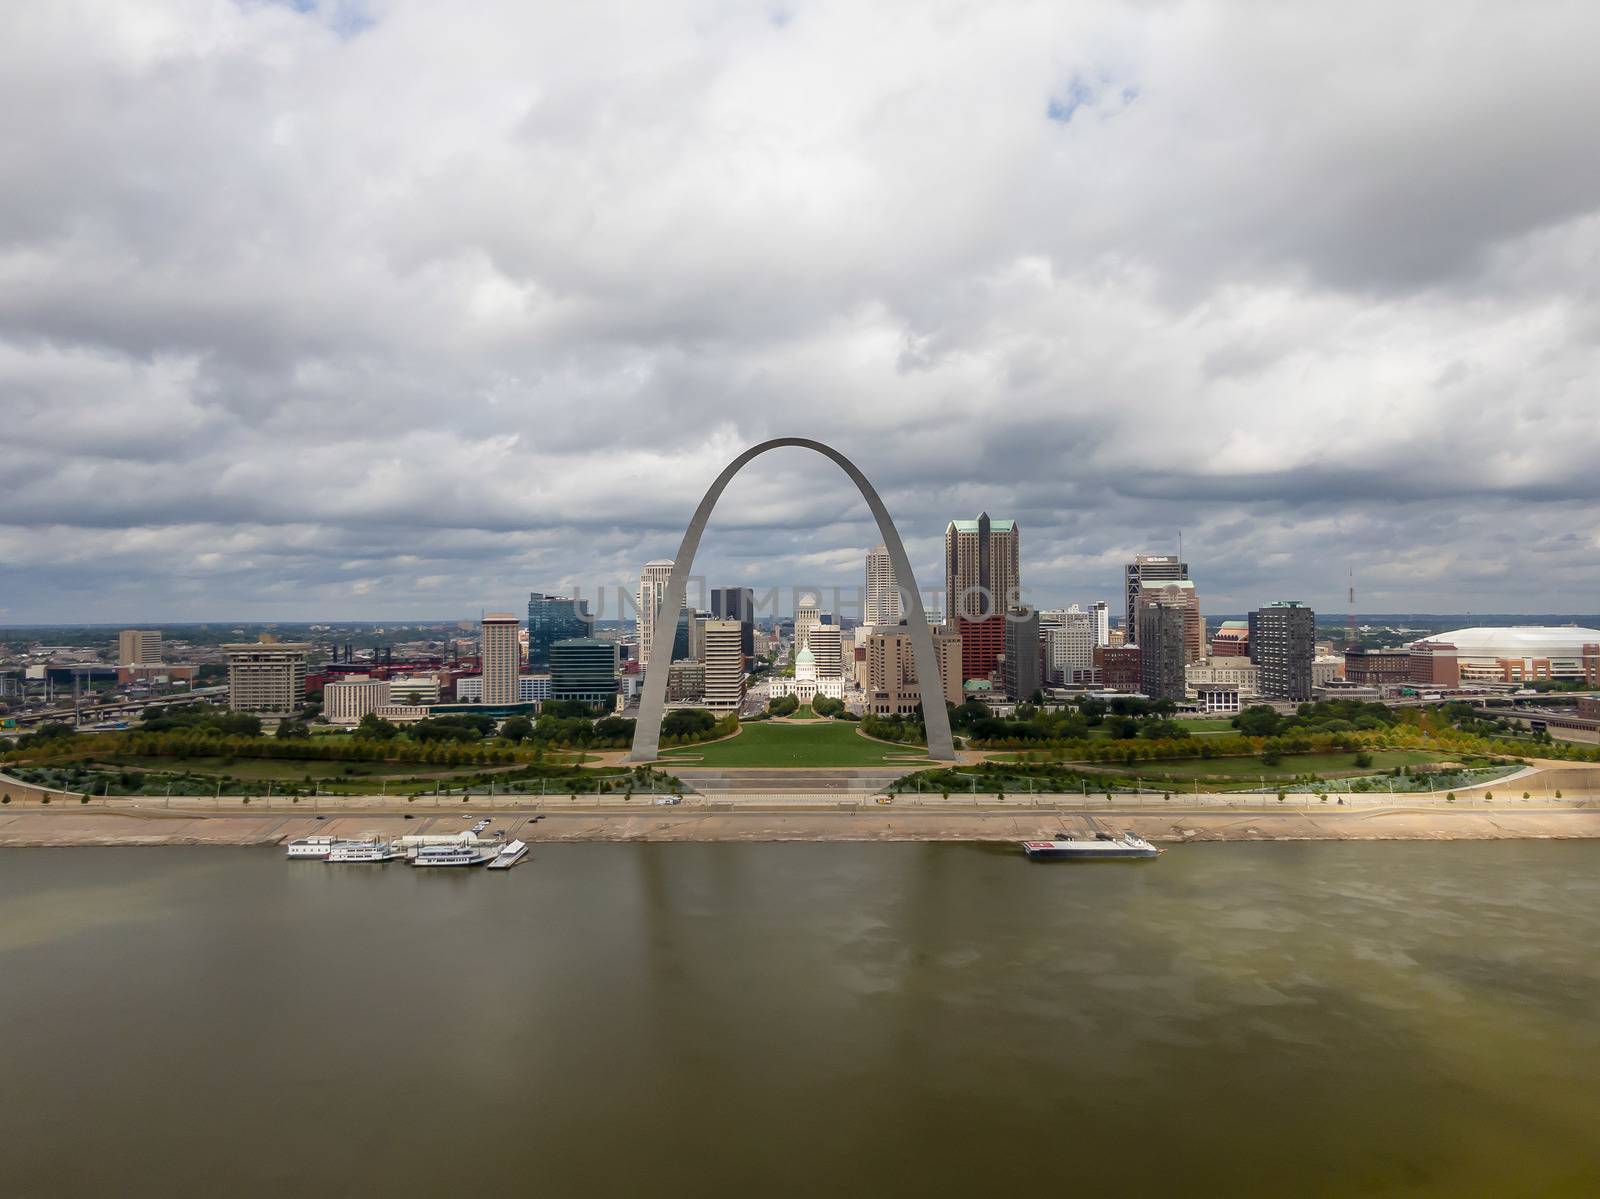 August 28, 2020 - St Louis, Missouri, USA: Aerial views of the city of St. Louis, Missouri with the St. Louis Arch and a barge on the Mississippi River